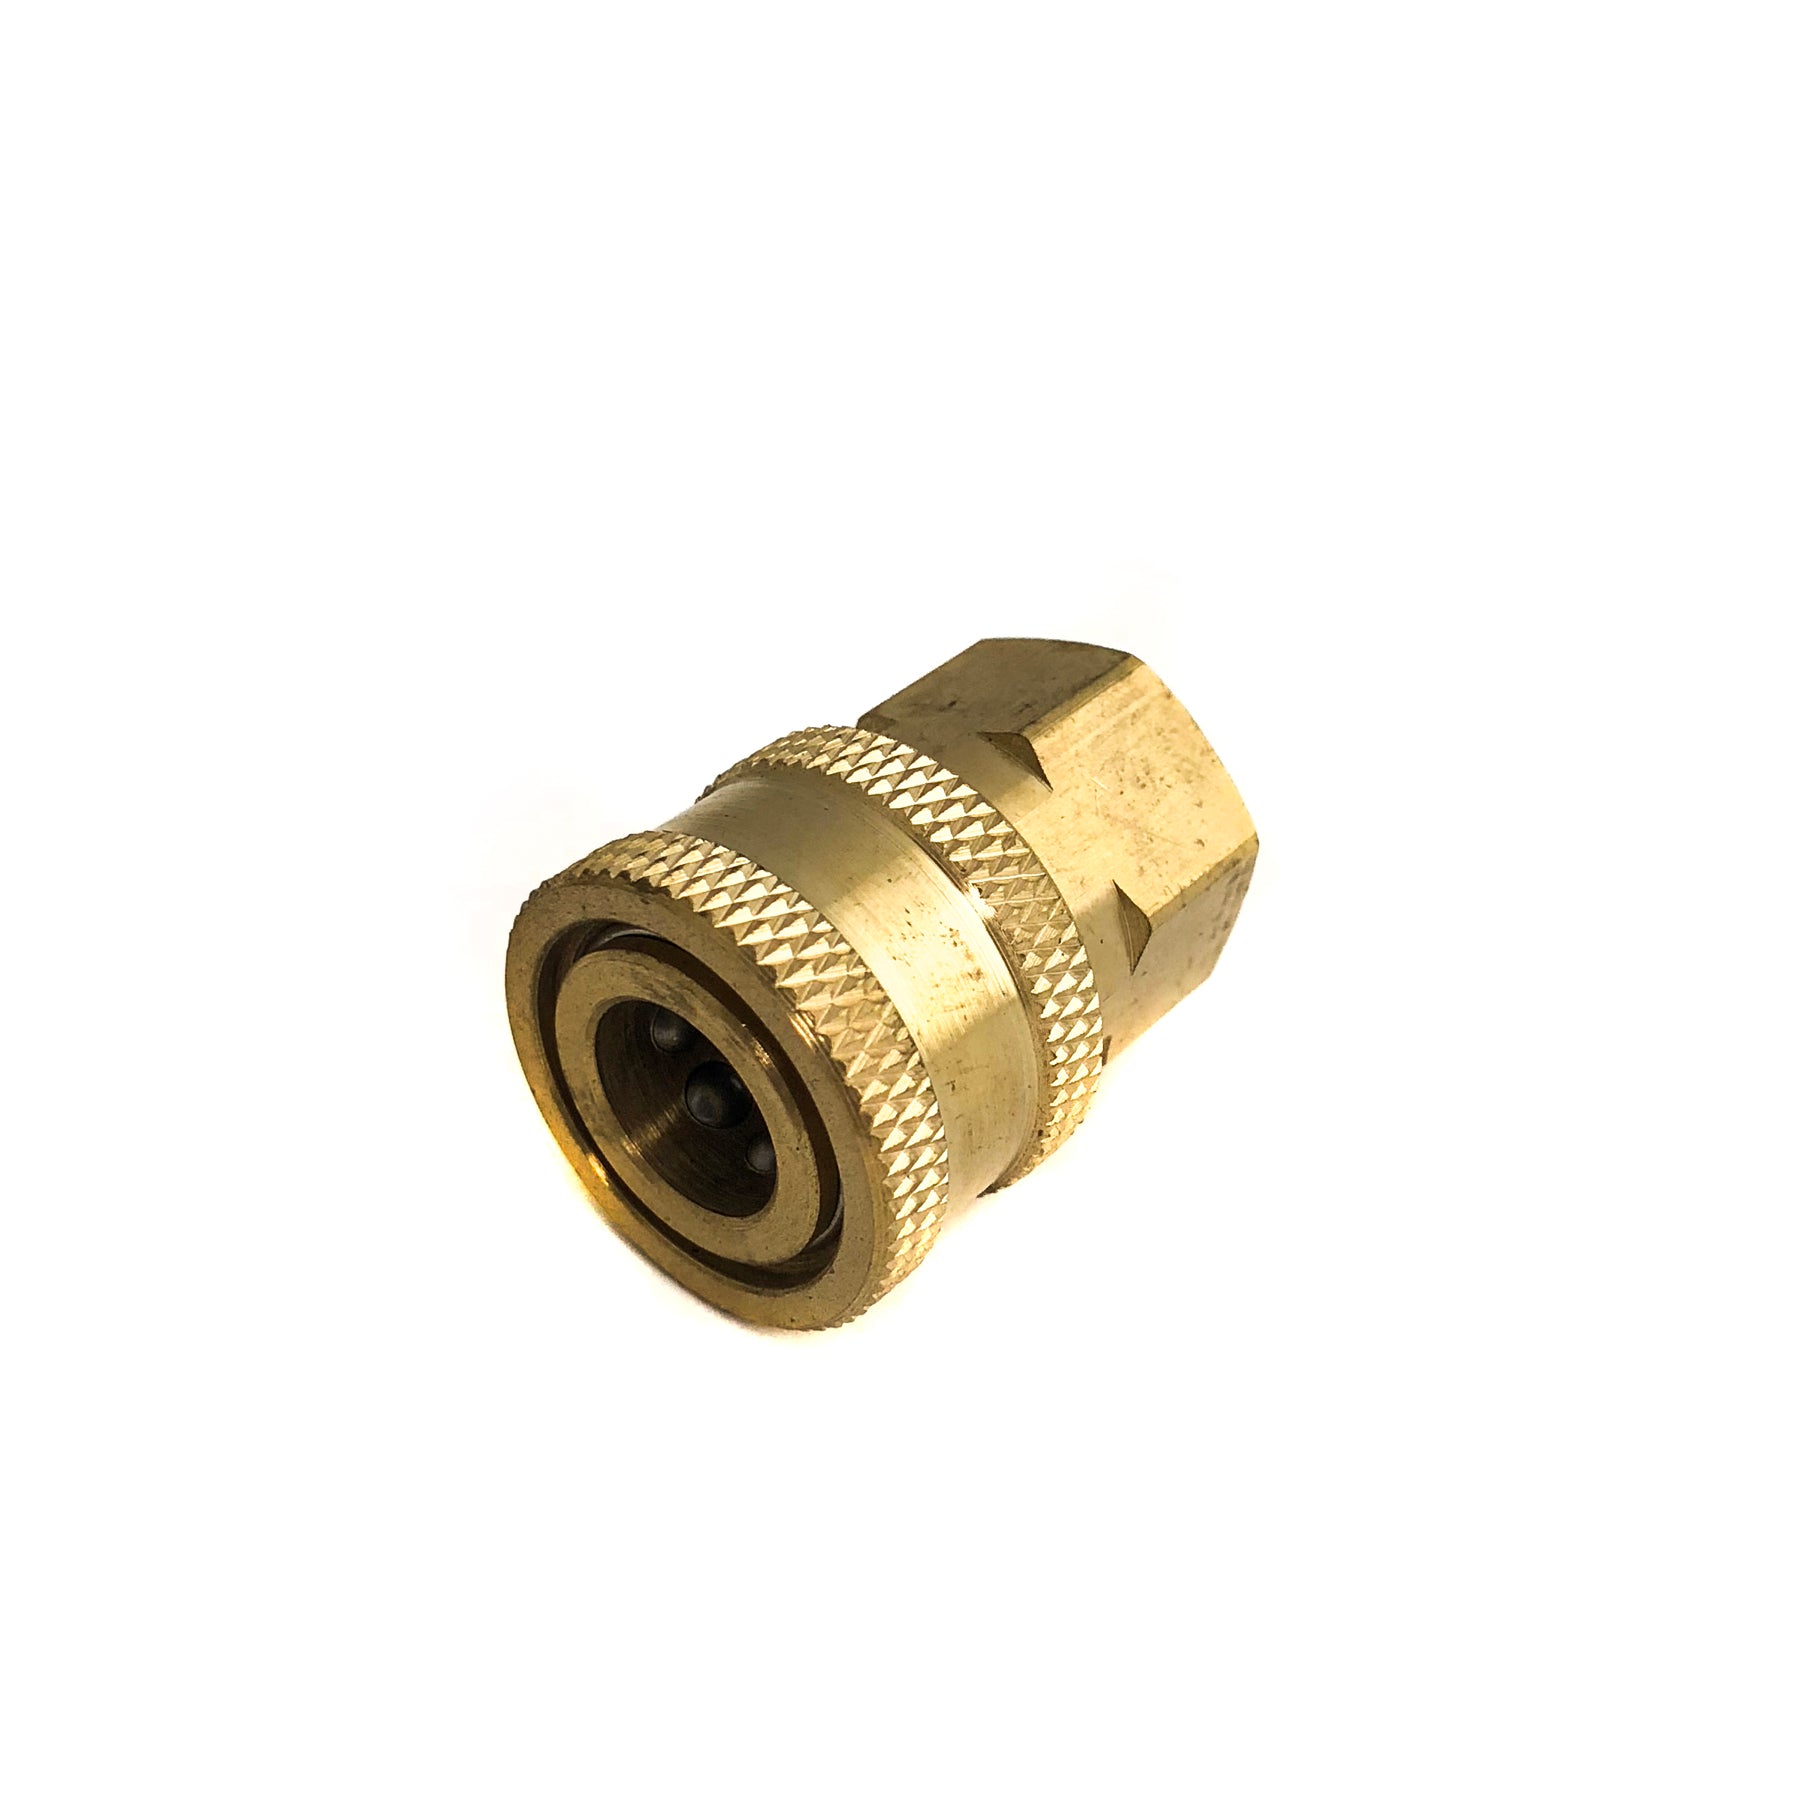 Pressure Washer Hose Fittings Brass 1-4 quick disconnect x female thread